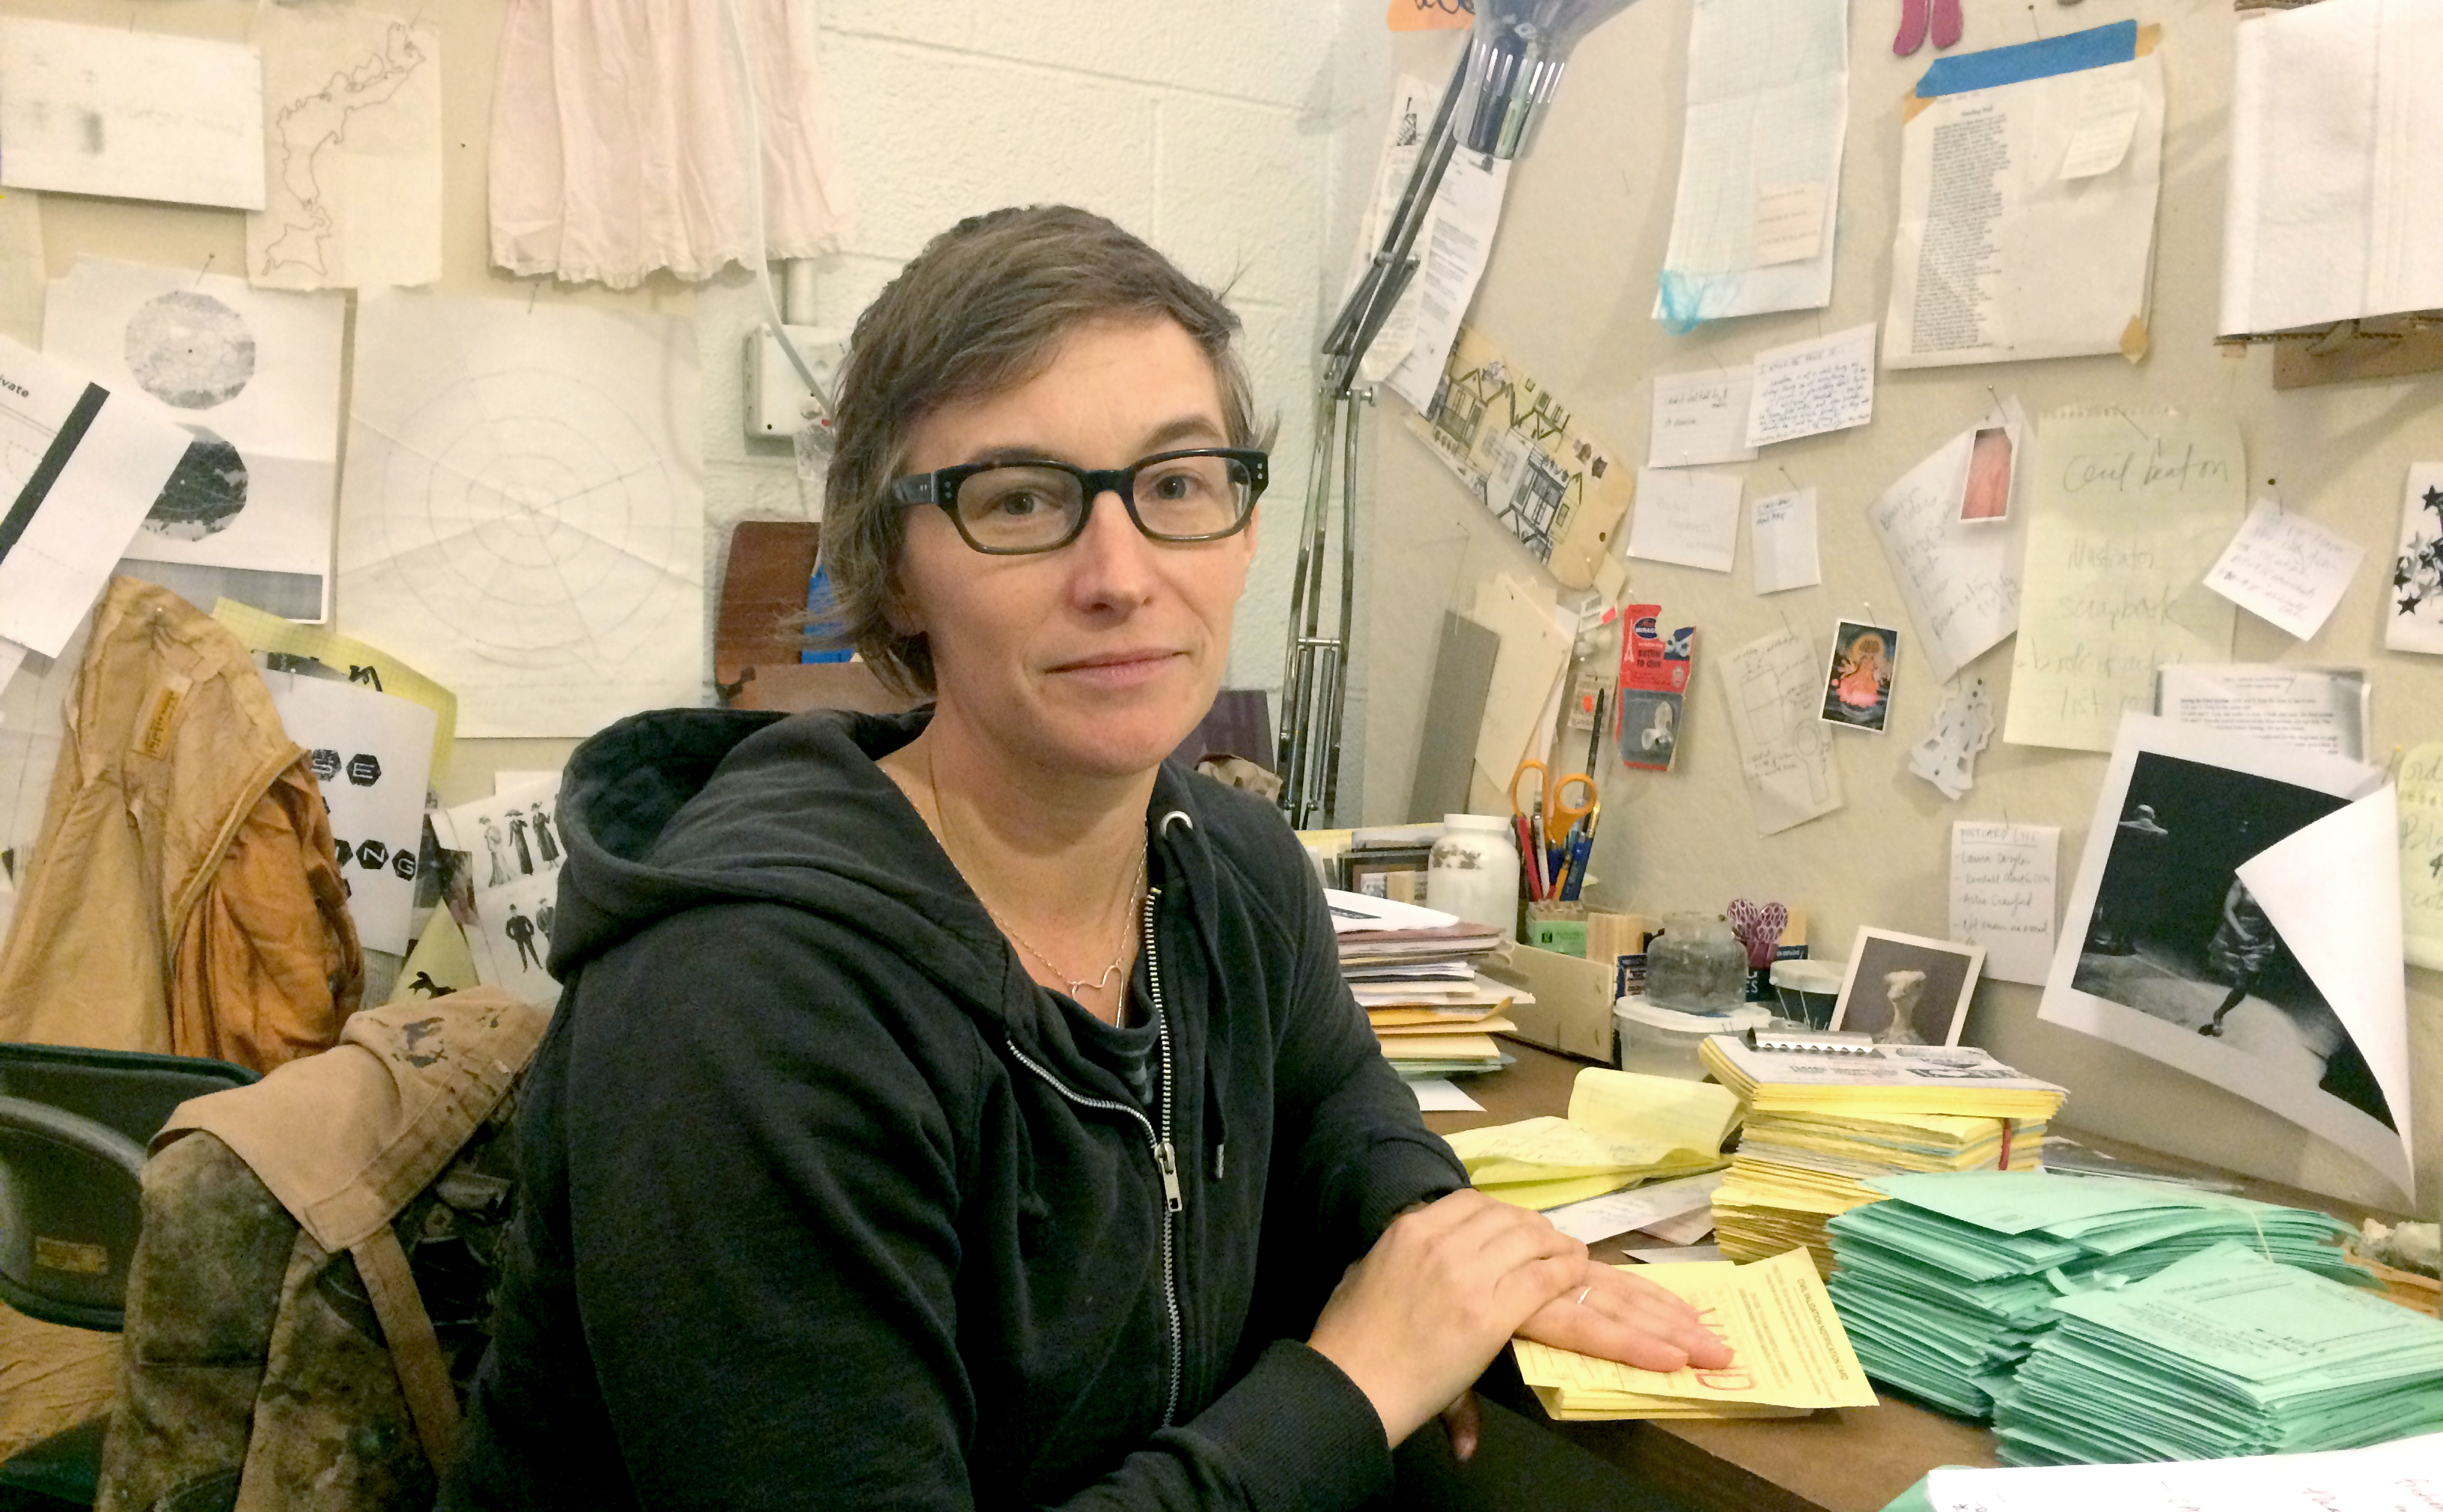 Stacey L. Kirby in her studio with documentation from "PARTicipate." (Photo: Kellie Bornhoft)